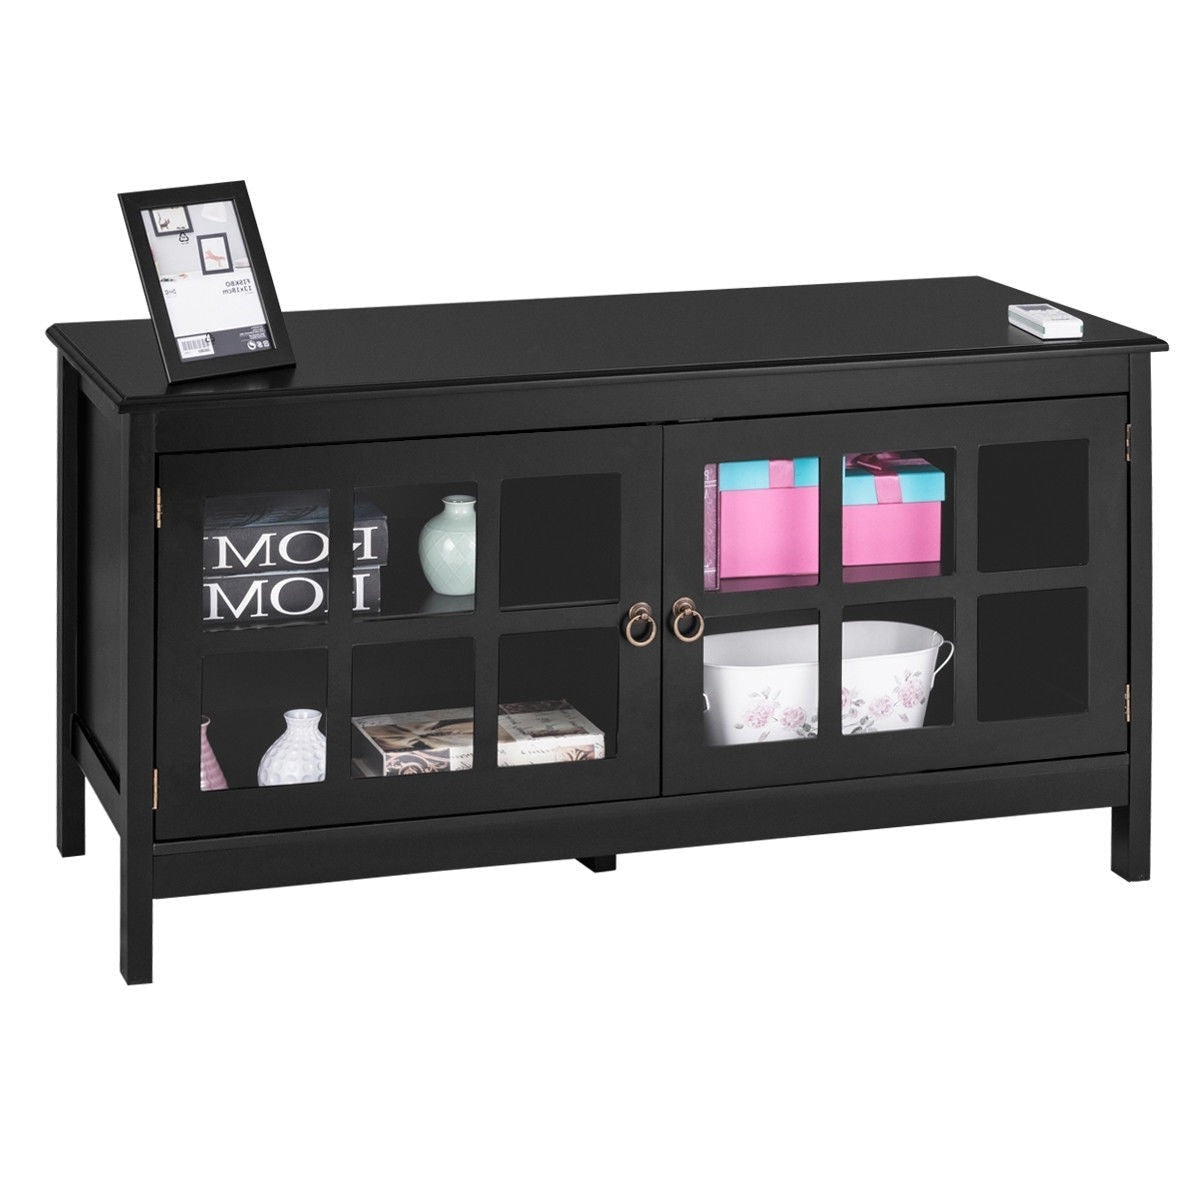 Living Room > TV Stands And Entertainment Centers - Black Wood TV Stand With Glass Panel Doors For Up To 50-inch TV